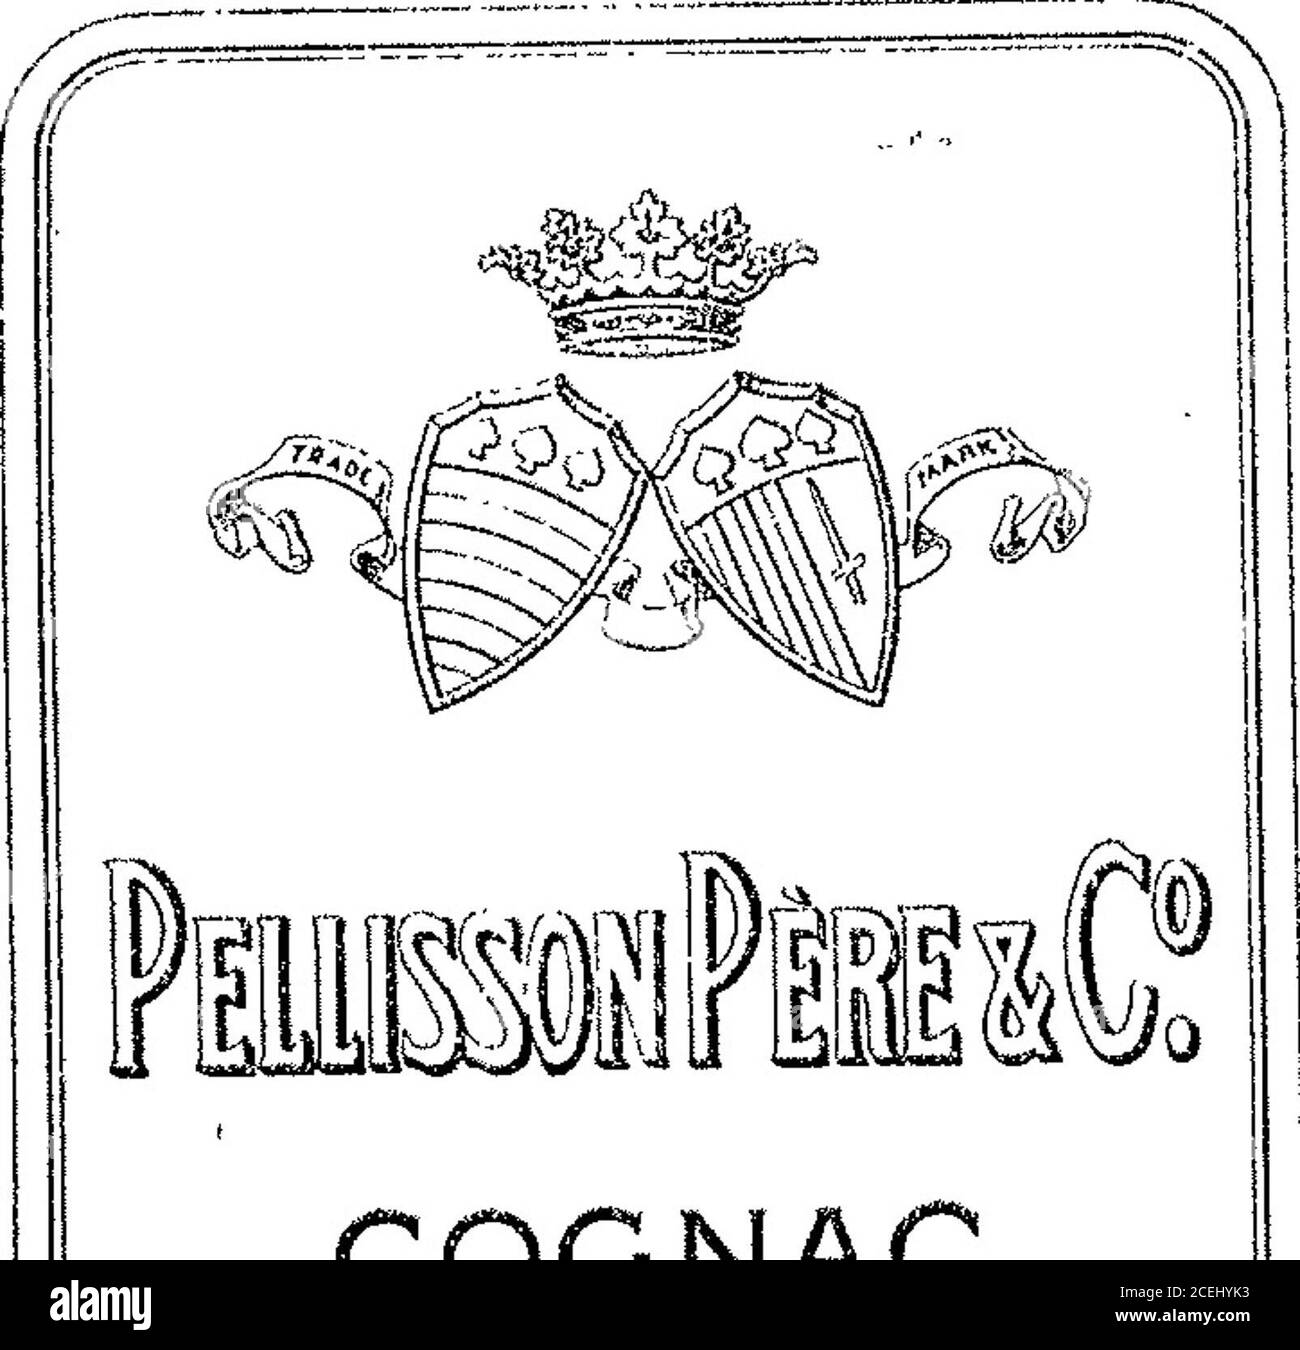 Pellisson pere Black and White Stock Photos & Images - Alamy